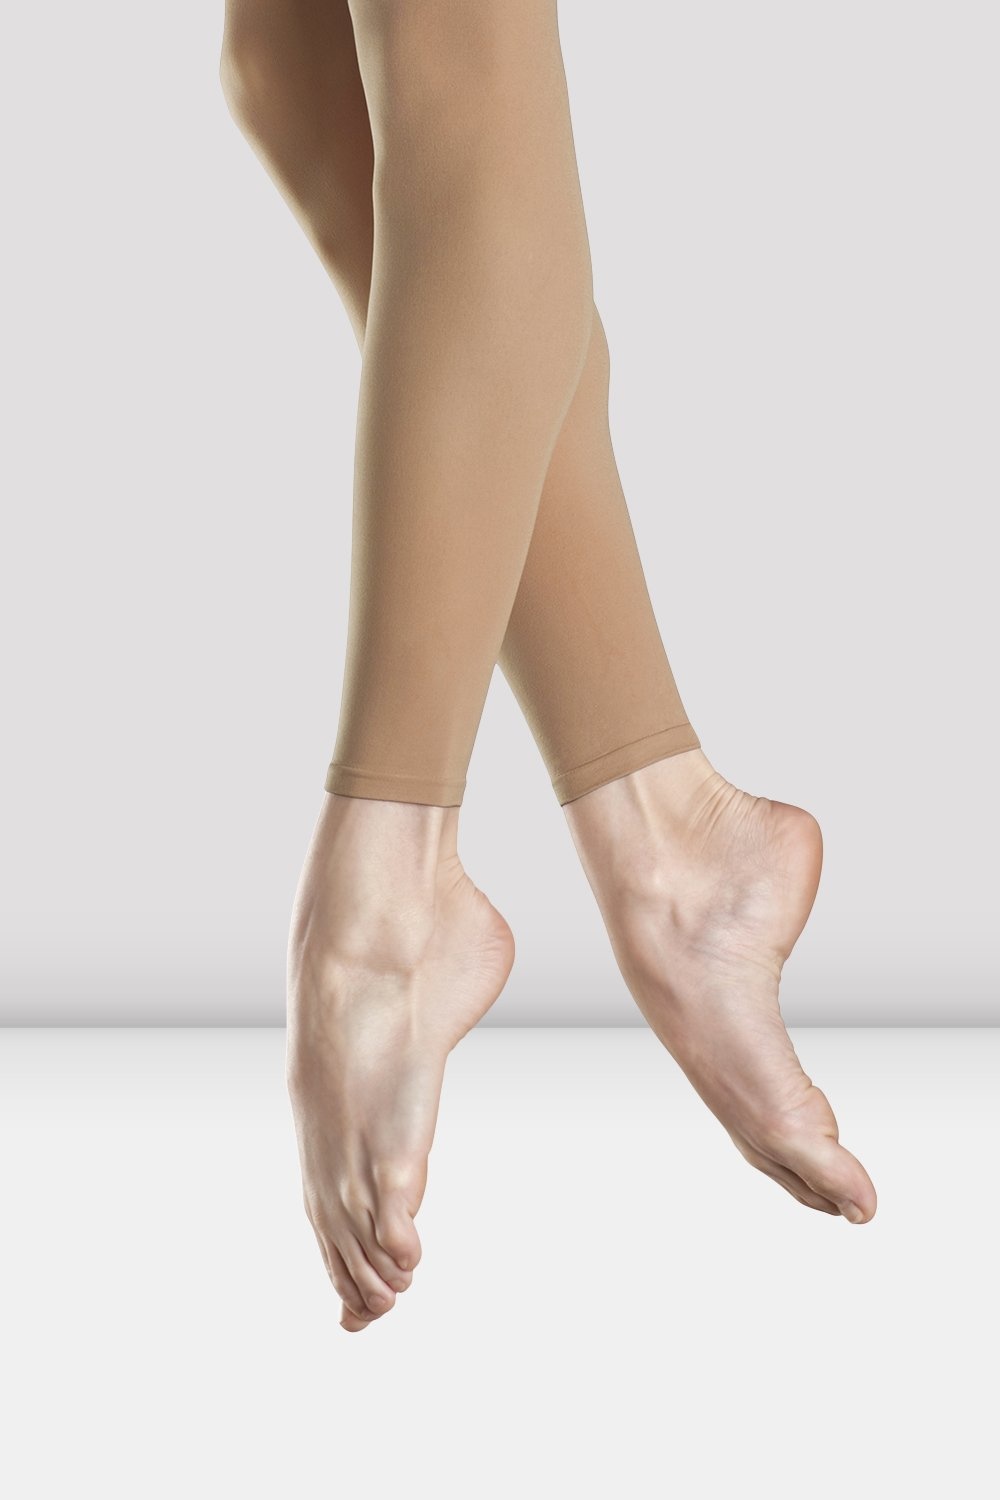 Light Tan Microfiber Ankle Length Footless Tights Style# 1025